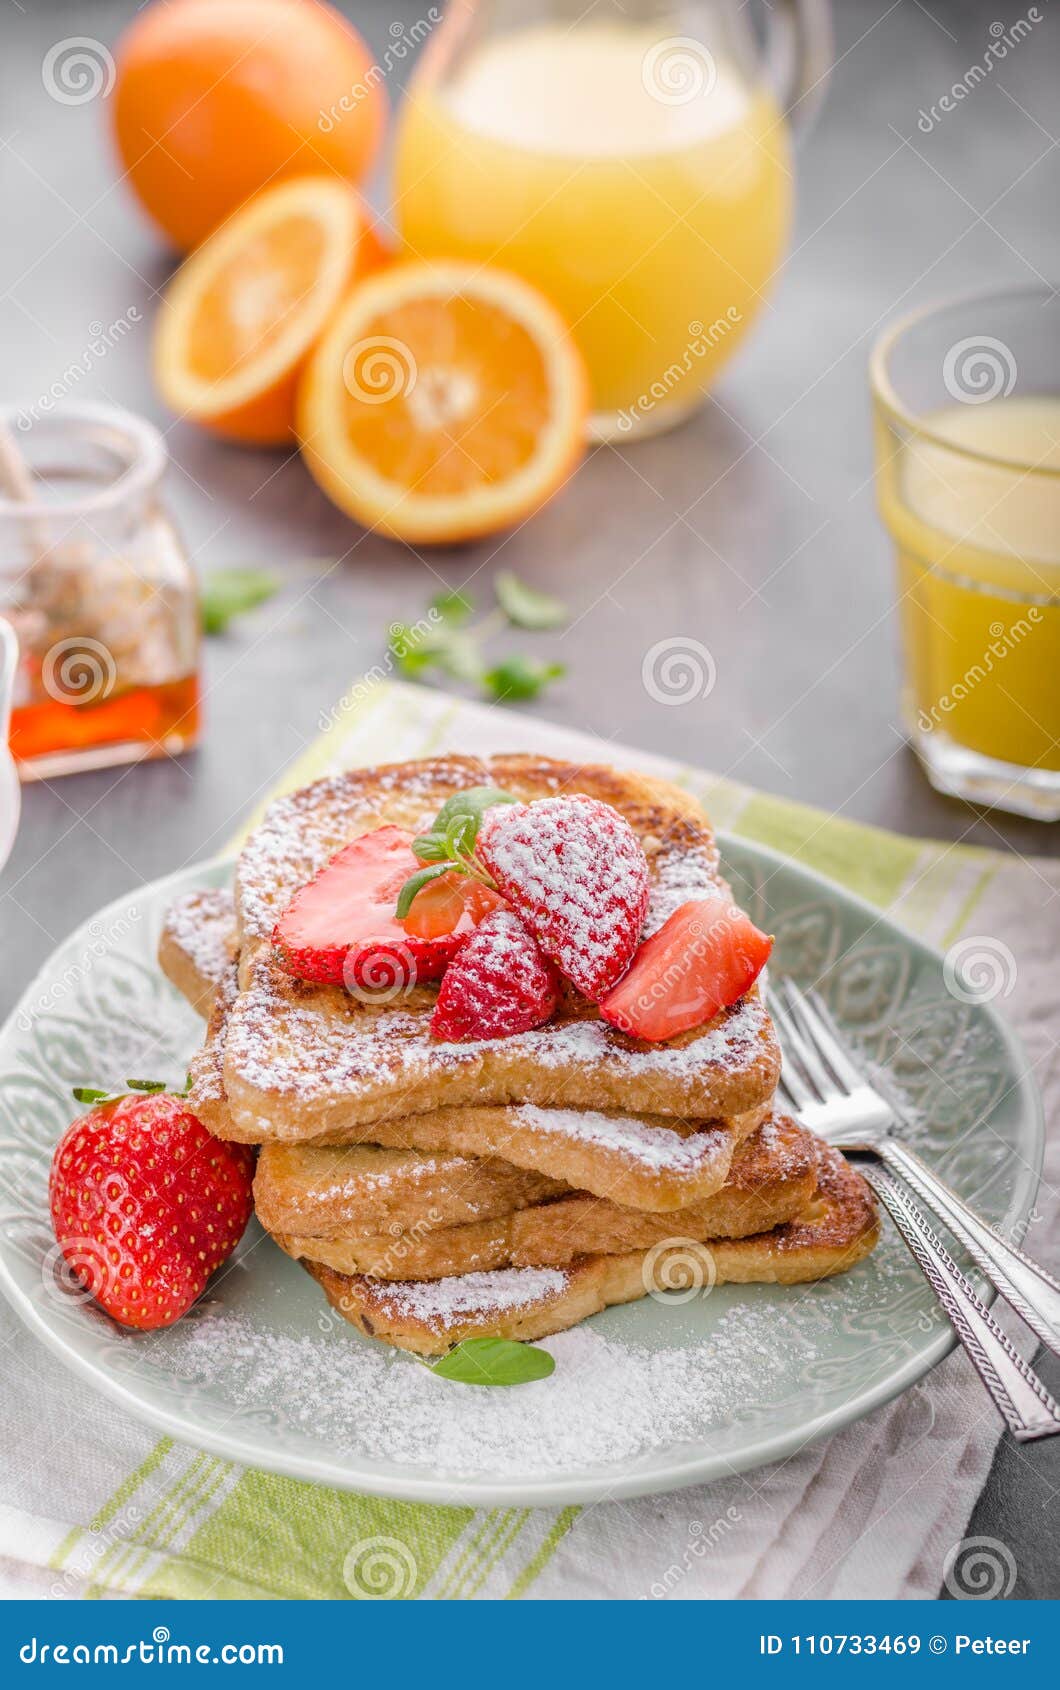 French Toast with Strawberries Stock Image - Image of plate, orange ...